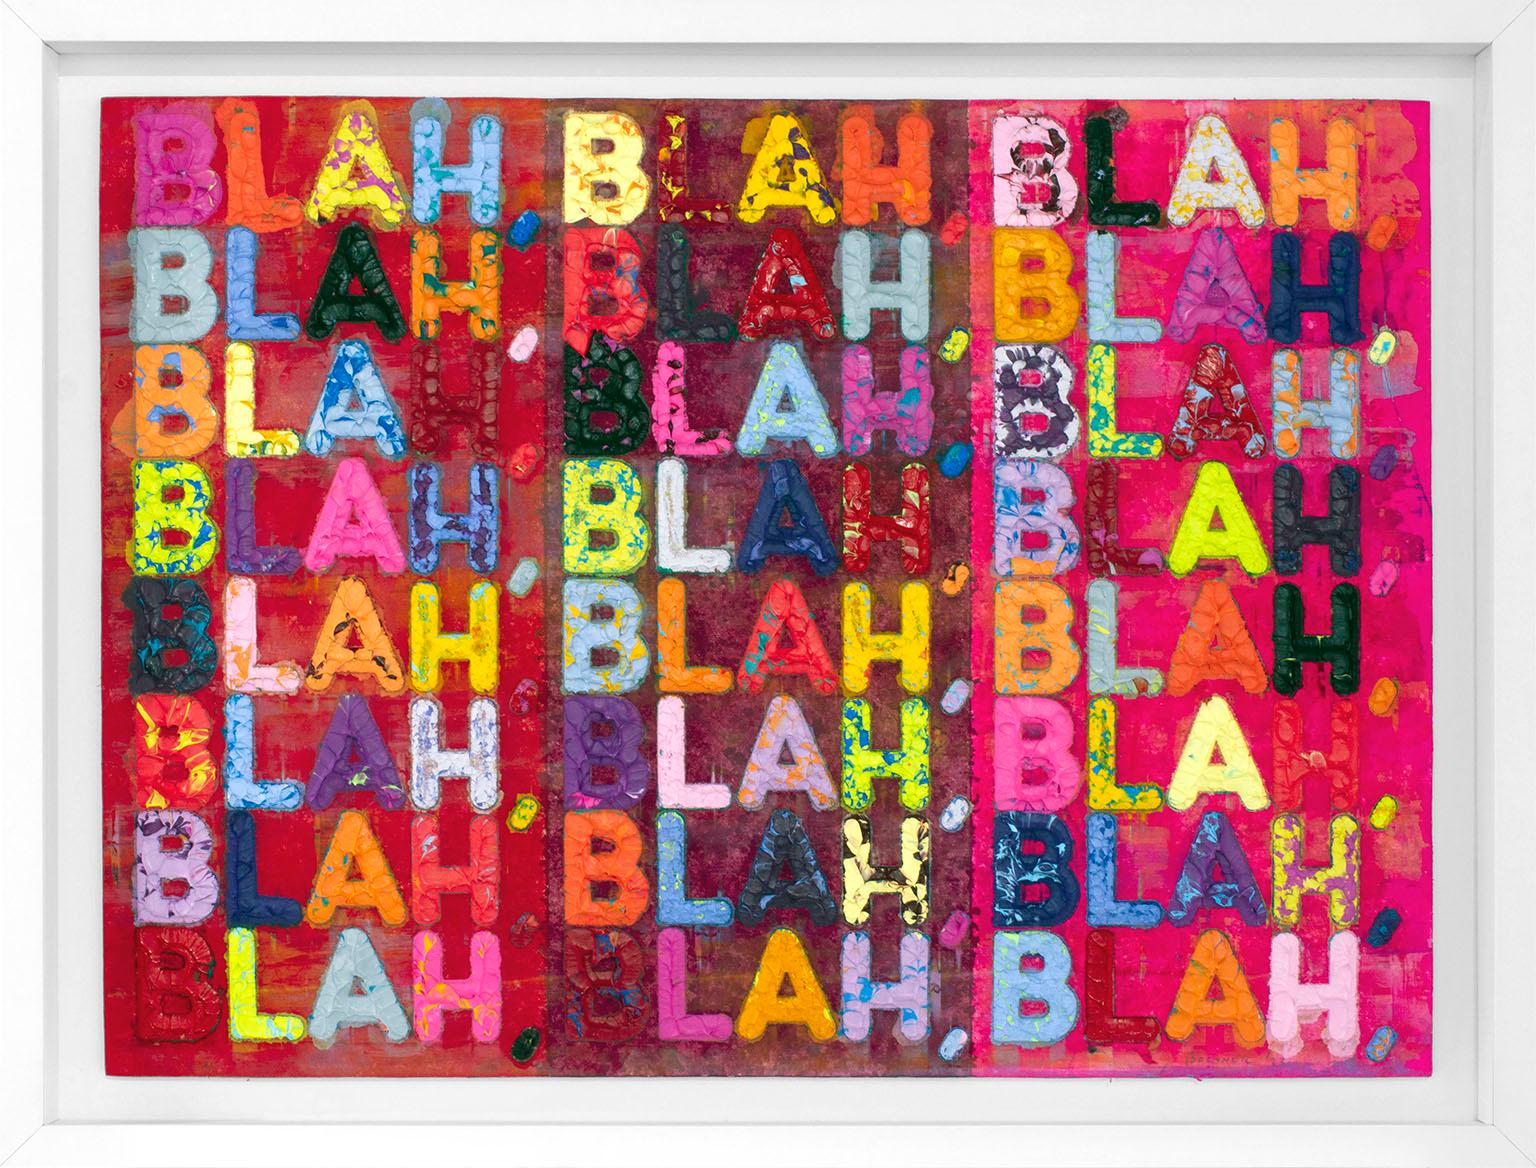 Brightly colored "Blah, Blah, Blah" monoprint in oil with collage, engraving and embossment on handmade paper by artist Mel Bochner from Two Palms Publishing. Signed and dated Bochner '23 lower right recto in graphite. Image size: 22 3/4 x 30 3/4